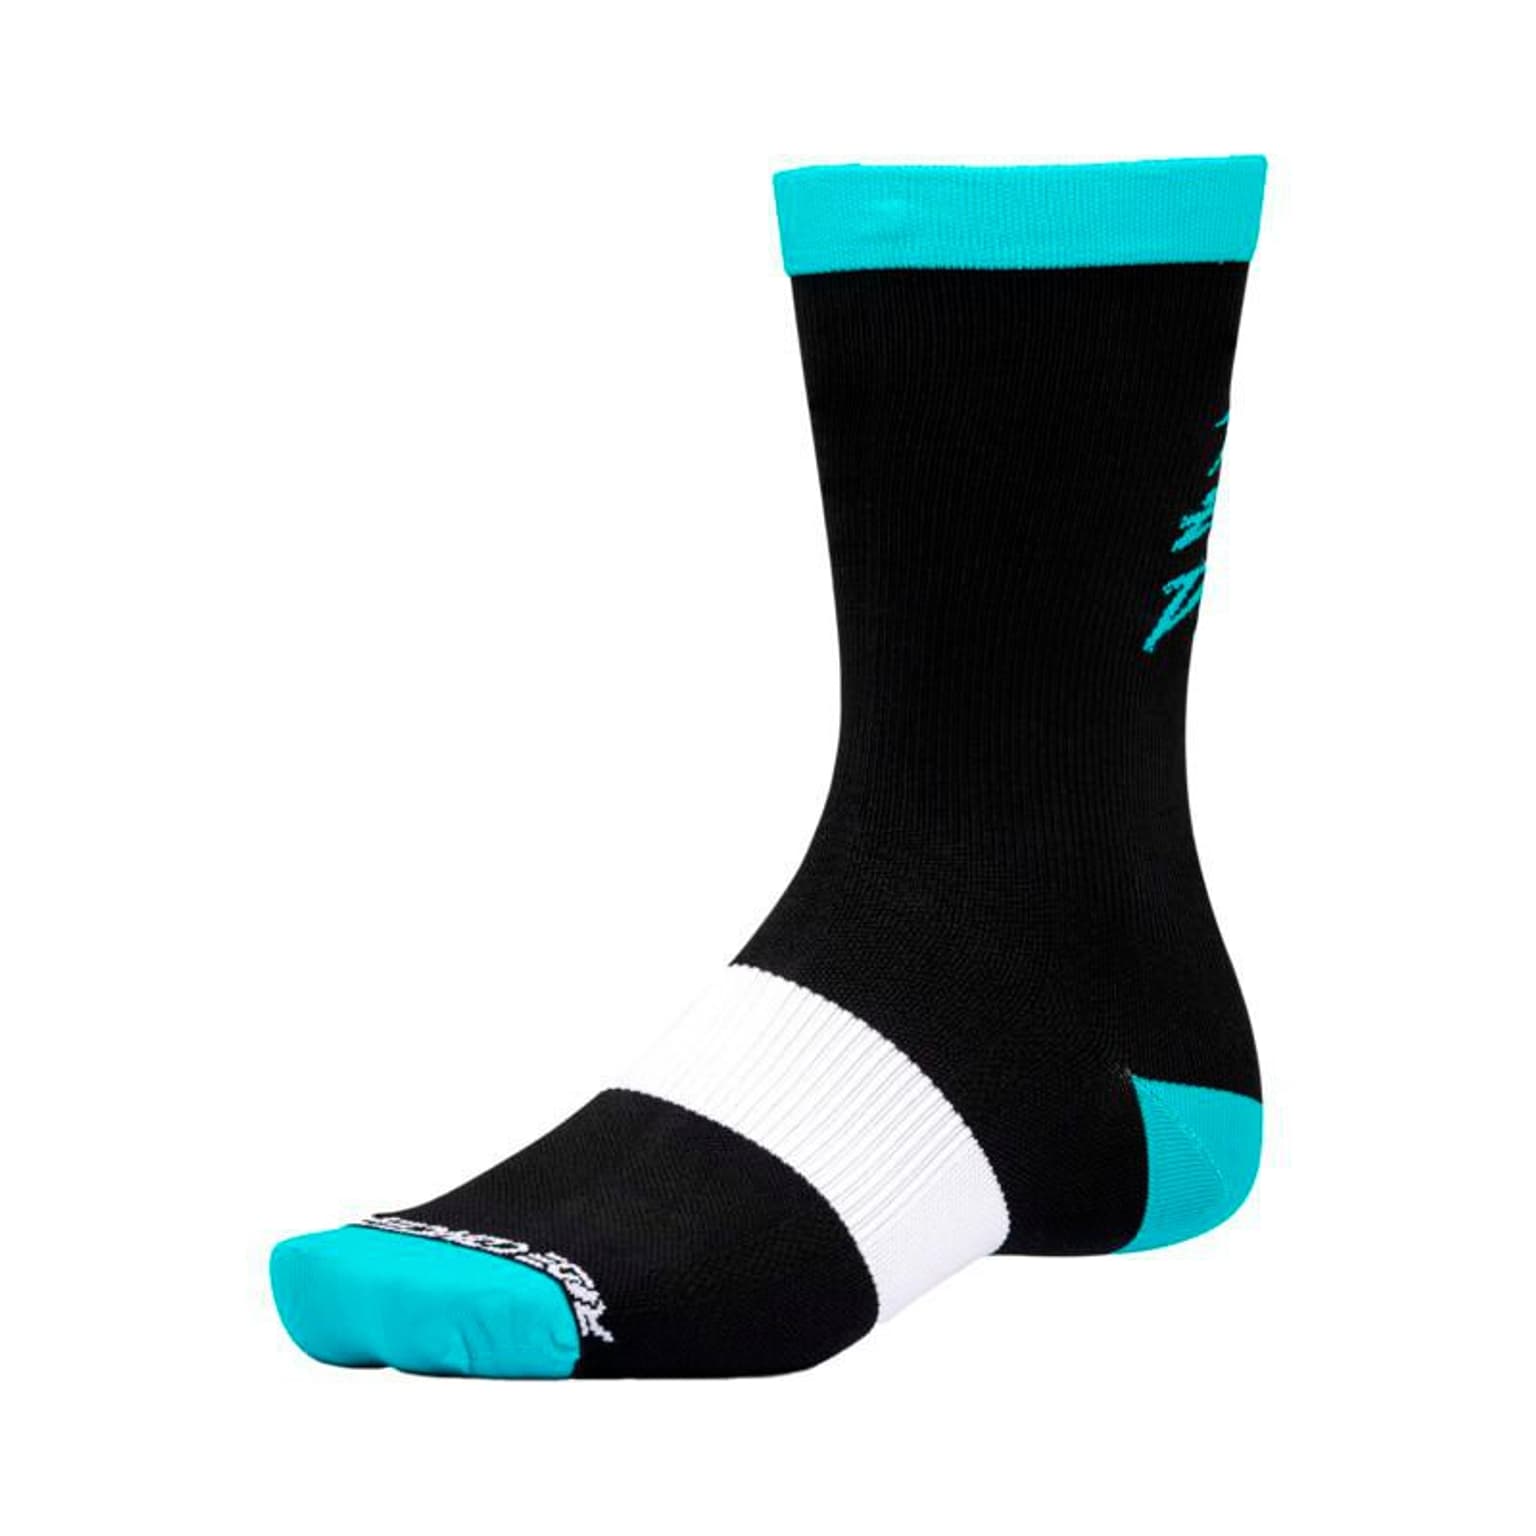 Ride Concepts Ride Concepts Ride Every Day Synthetic Chaussettes de vélo turquoise 2